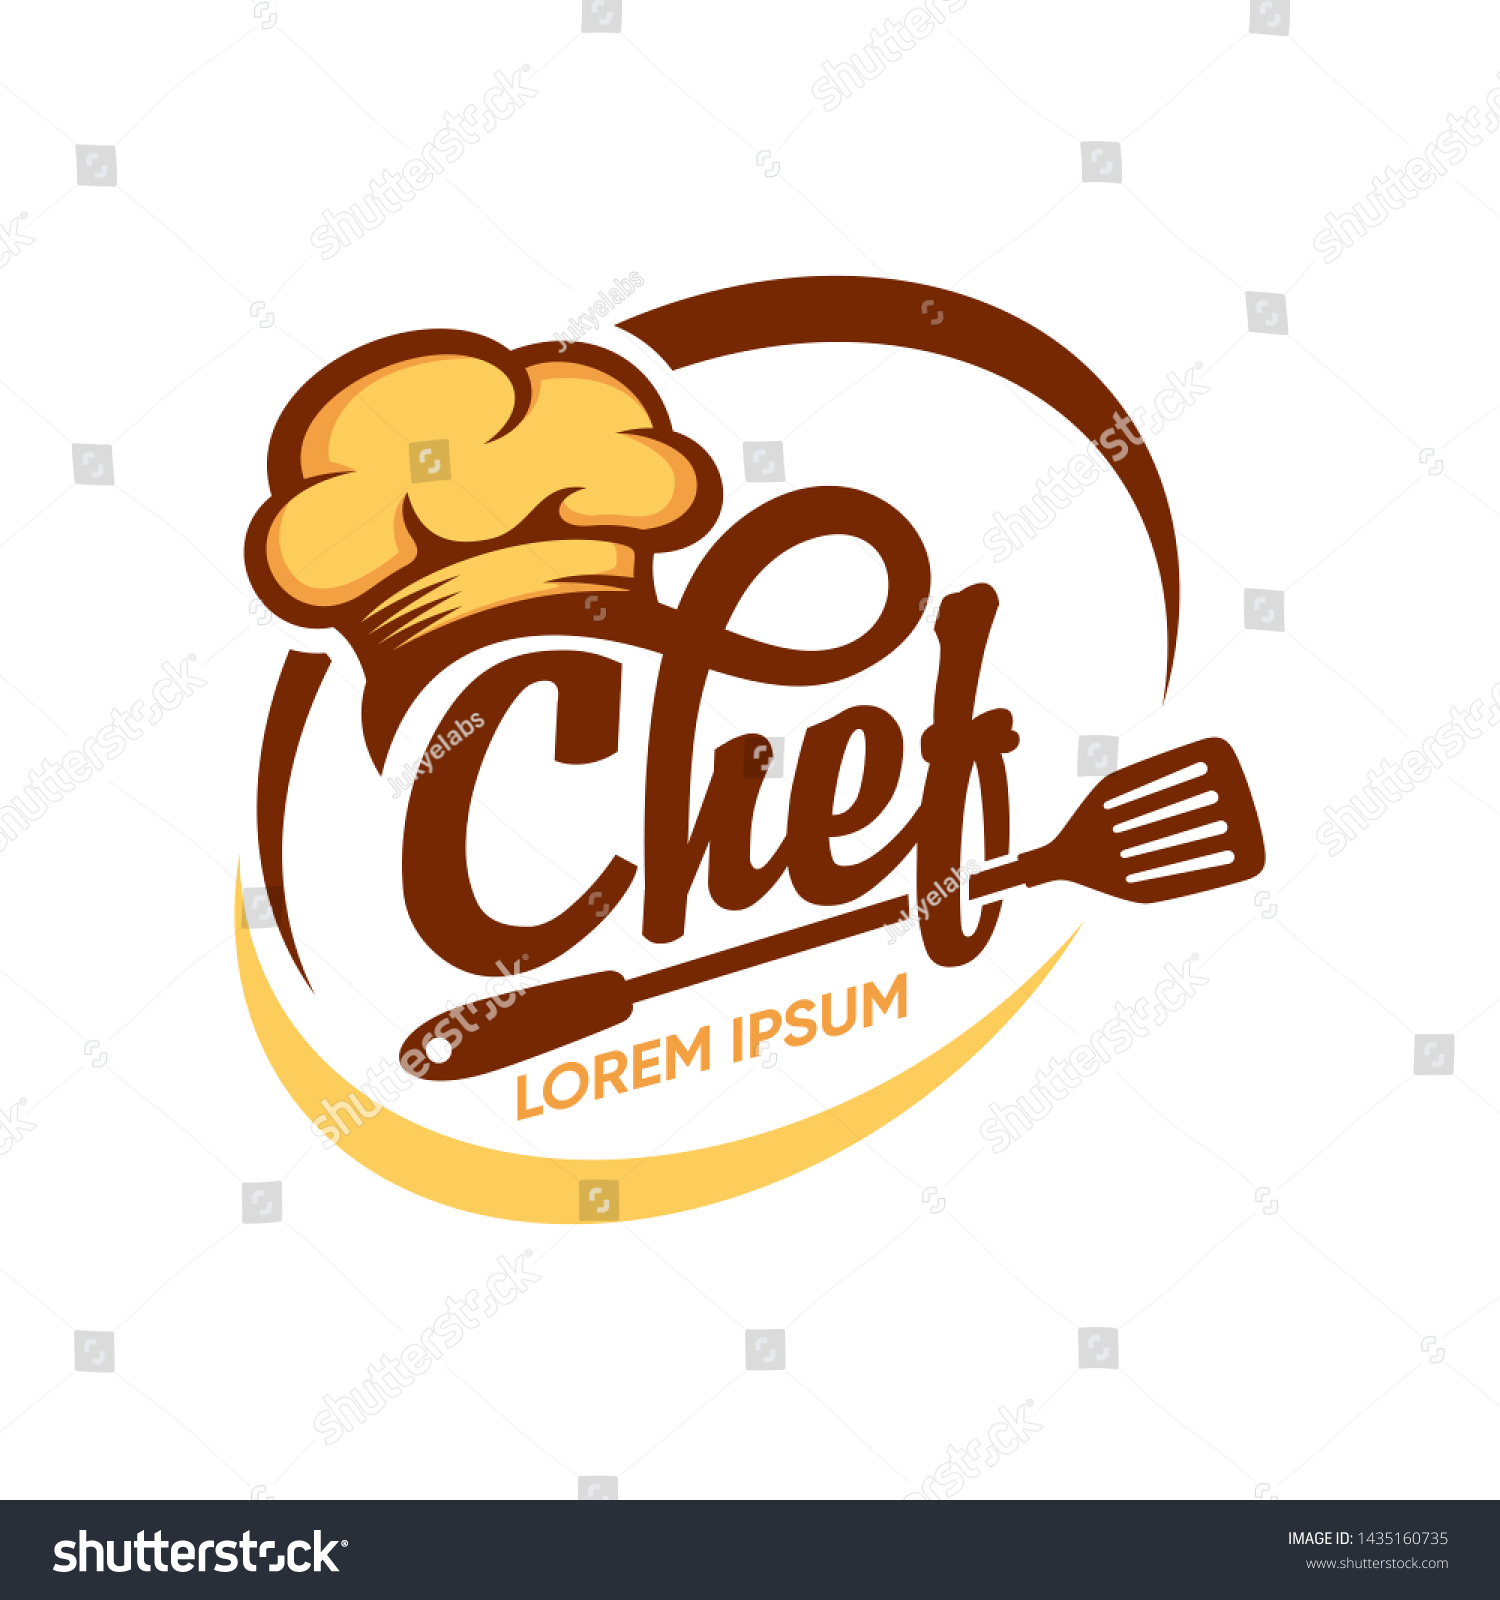 Chef Logos Images